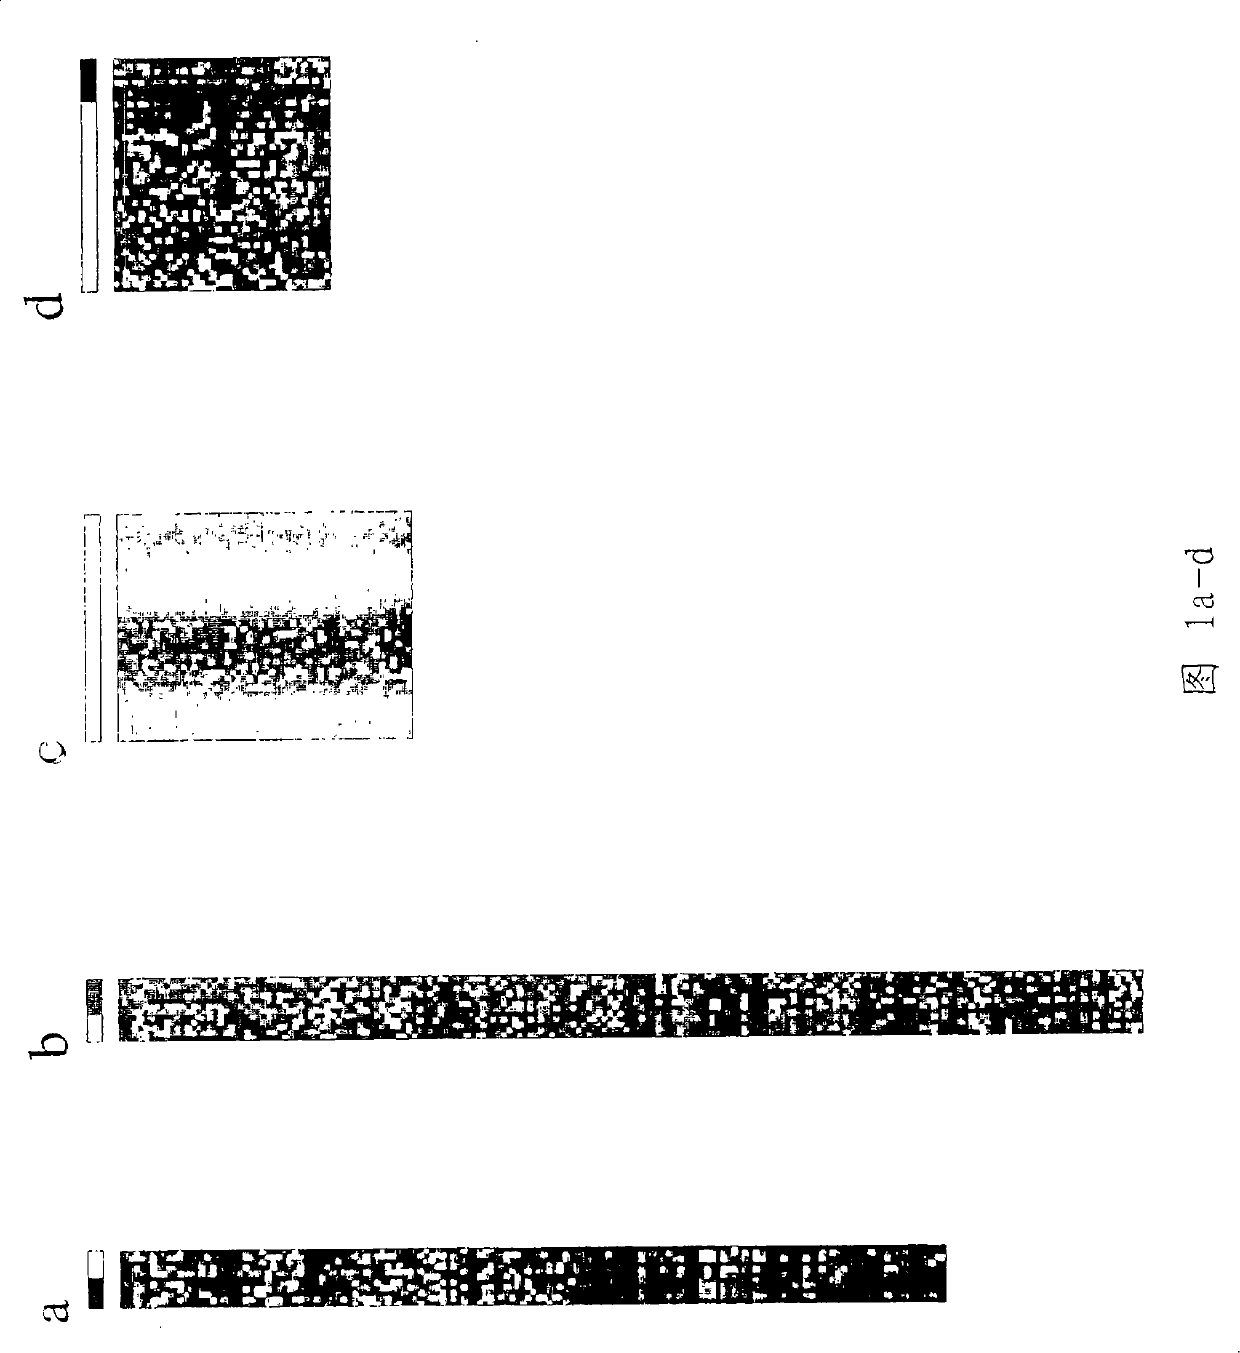 Method for confirming tumour differentiation grade